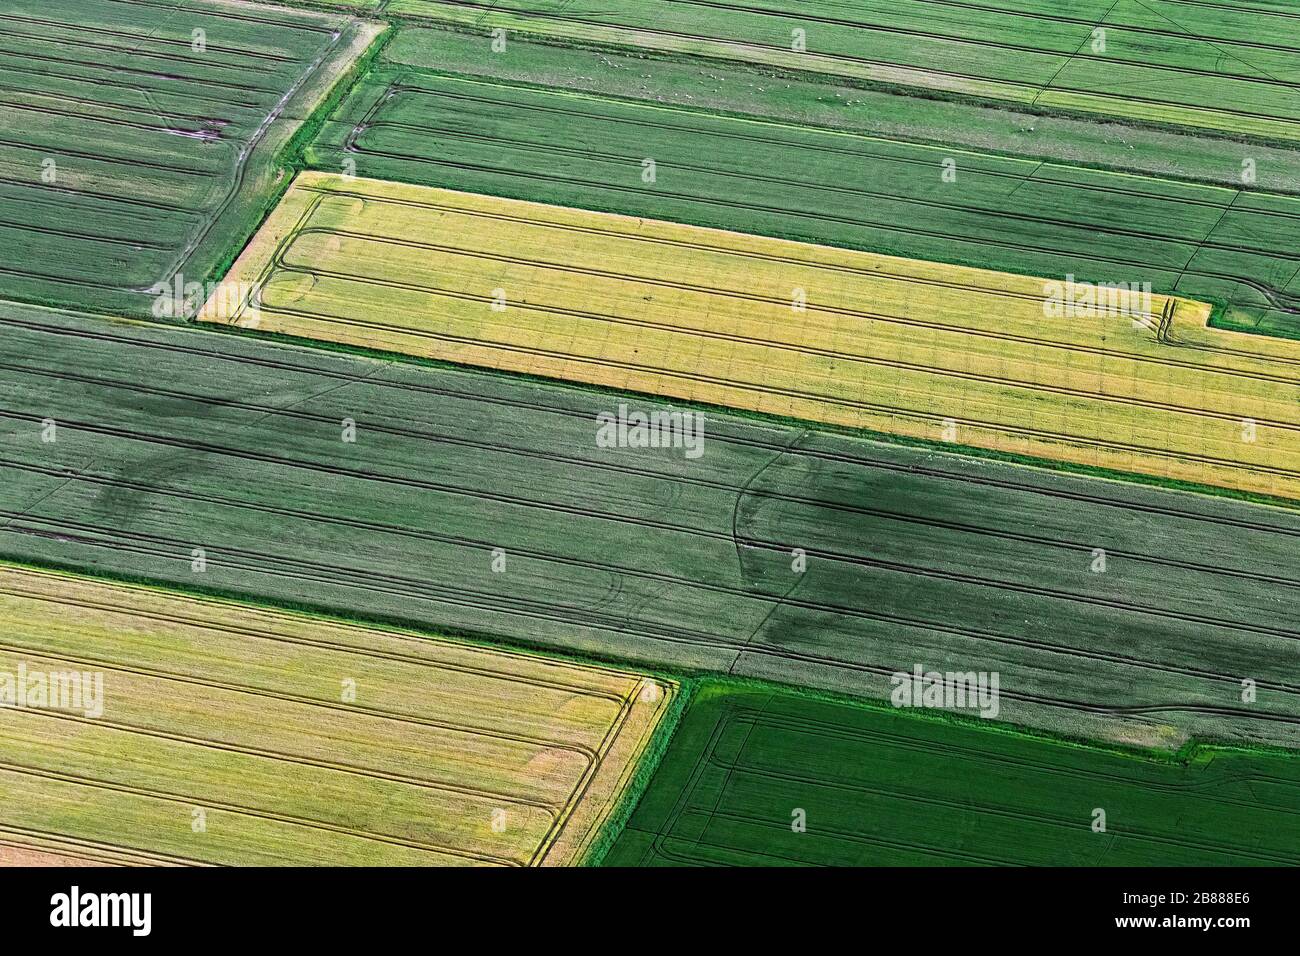 Aerial view over farmland showing tractor tracks in agricultural parcels / plots of land with cereal crops and wheat fields / cornfields in summer Stock Photo